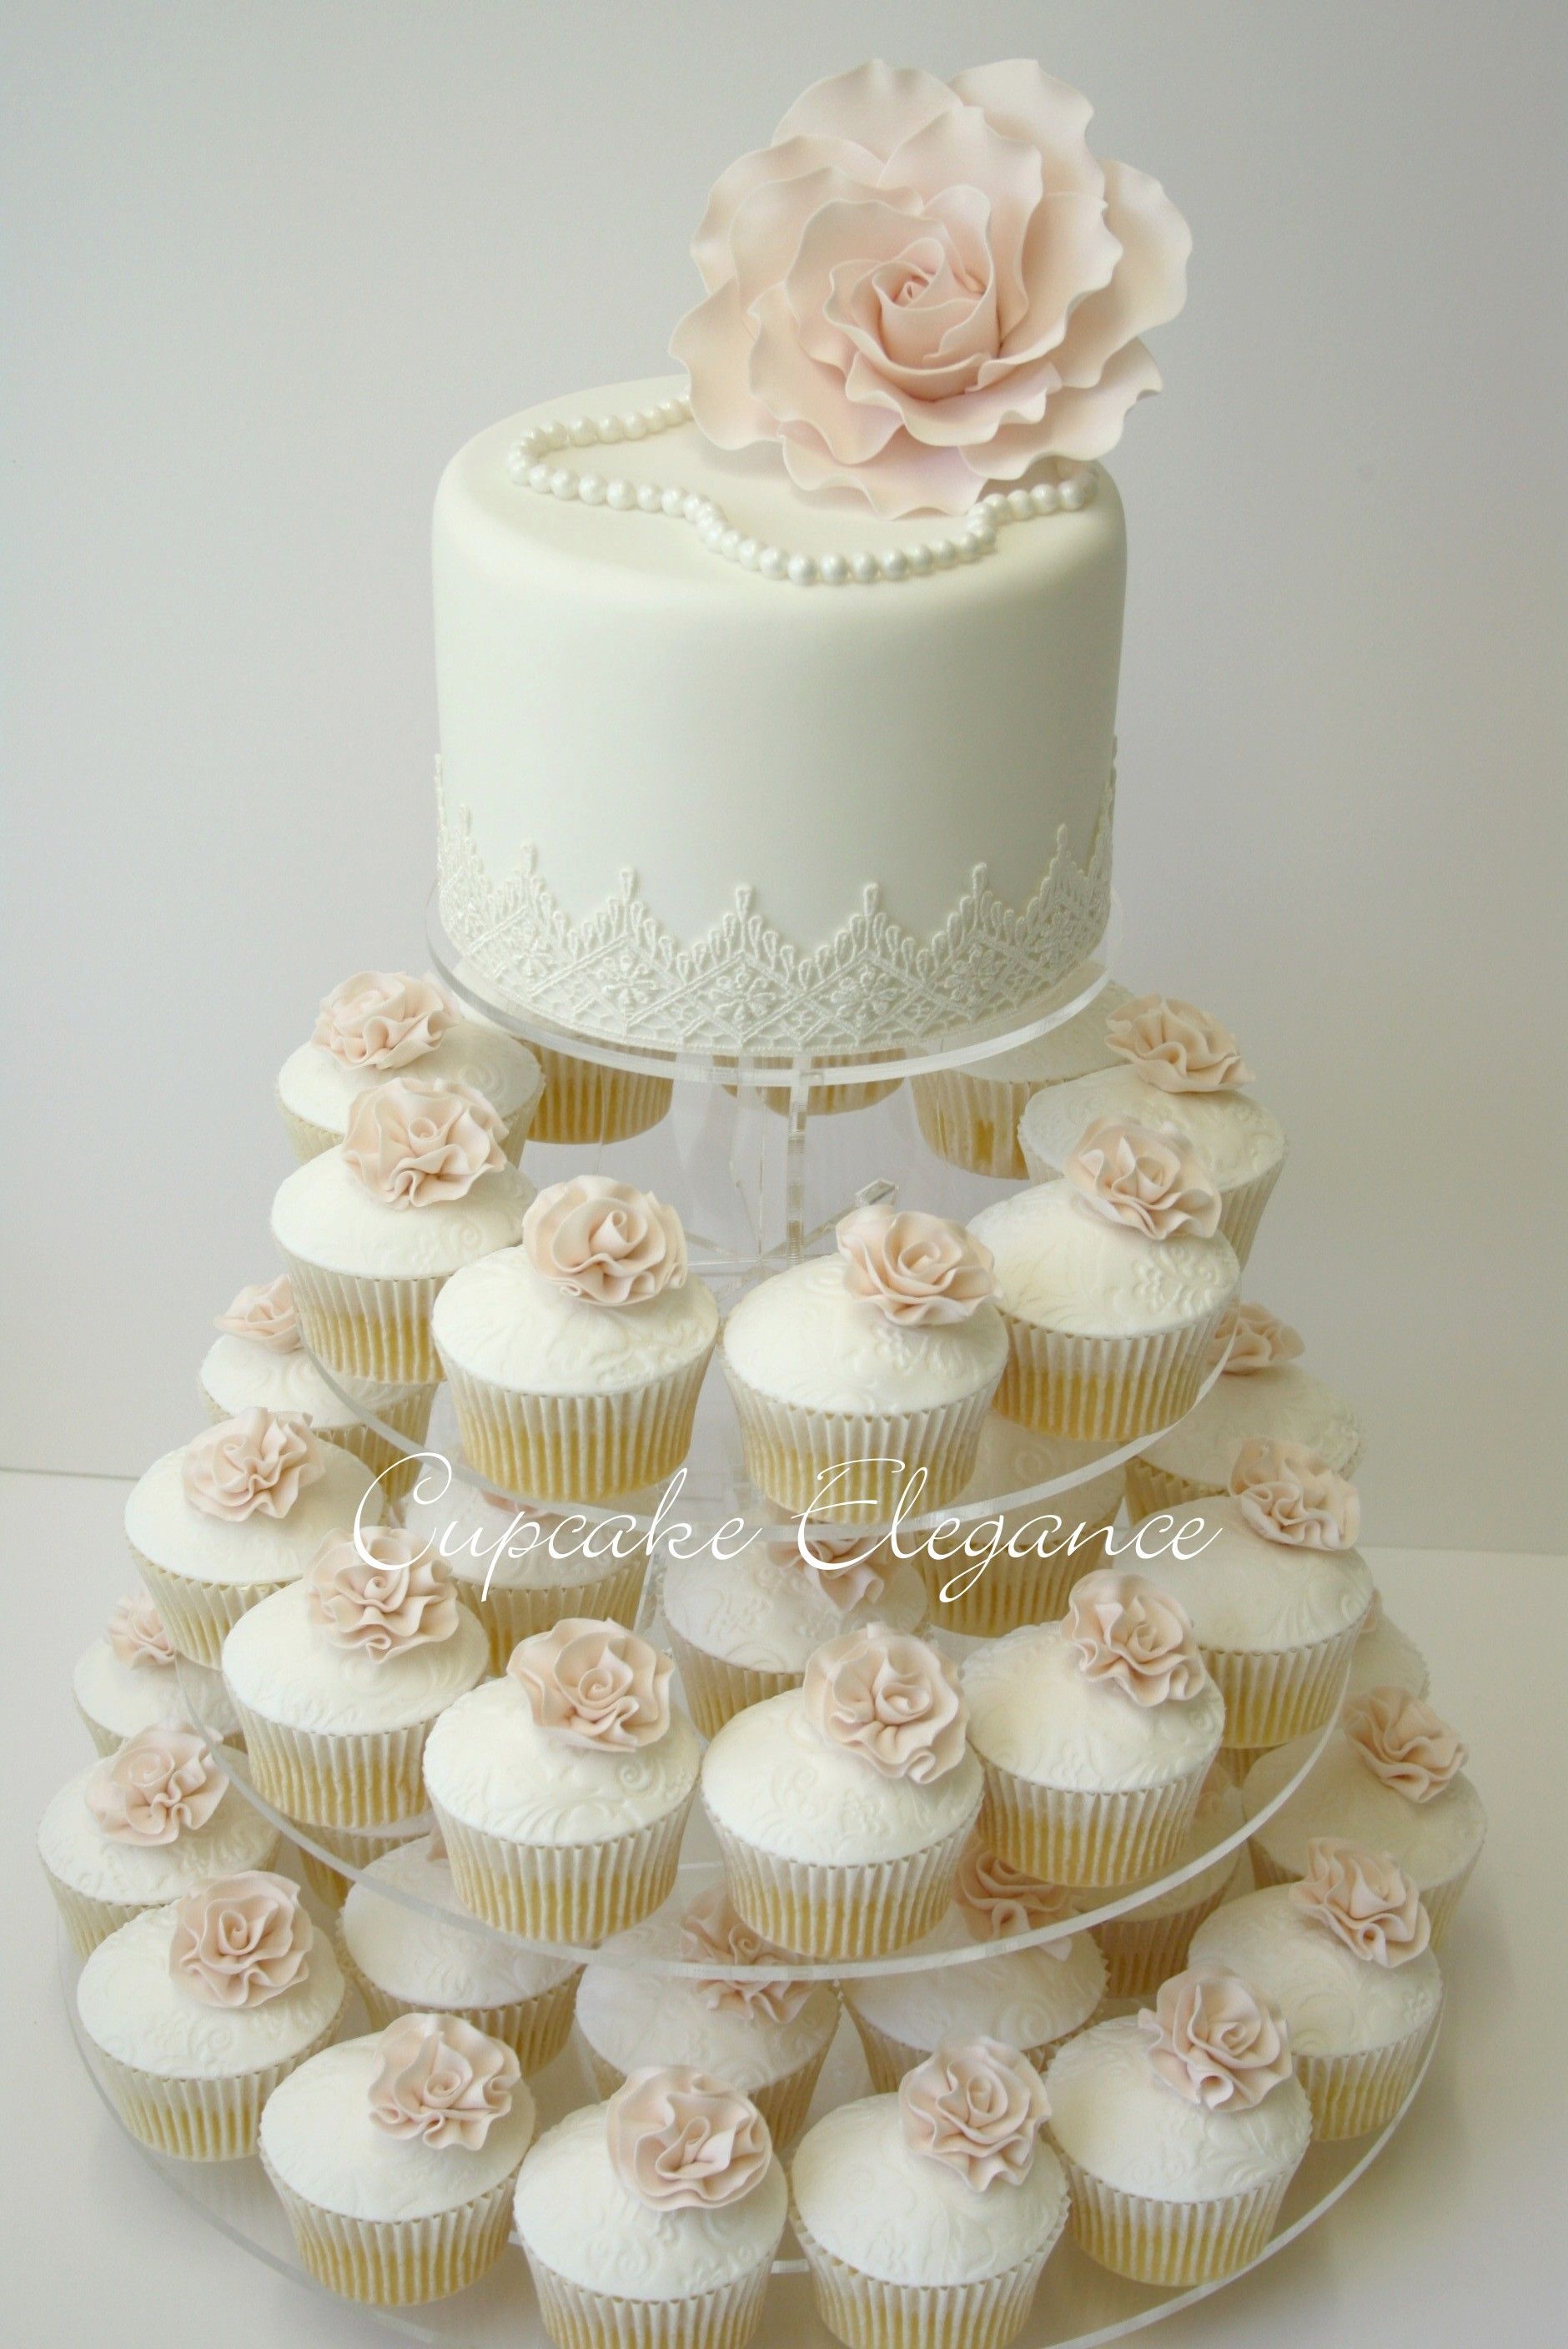 Cupcakes are fun!  But, this is great idea because you still have a wedding cake for your 1 year anniversary.